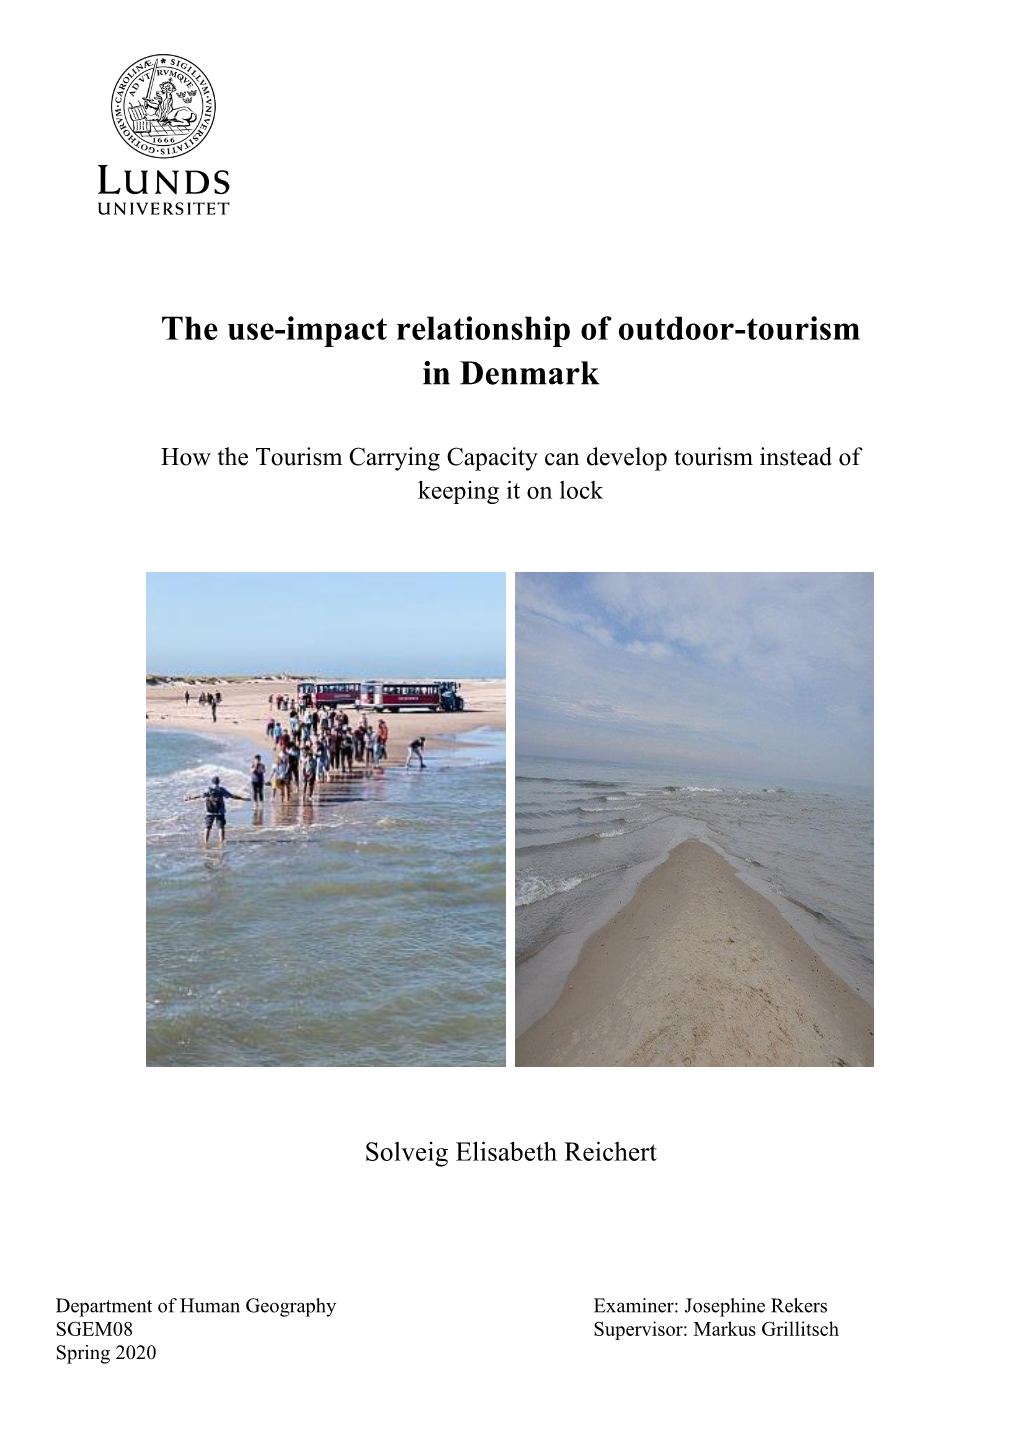 The Use-Impact Relationship of Outdoor-Tourism in Denmark